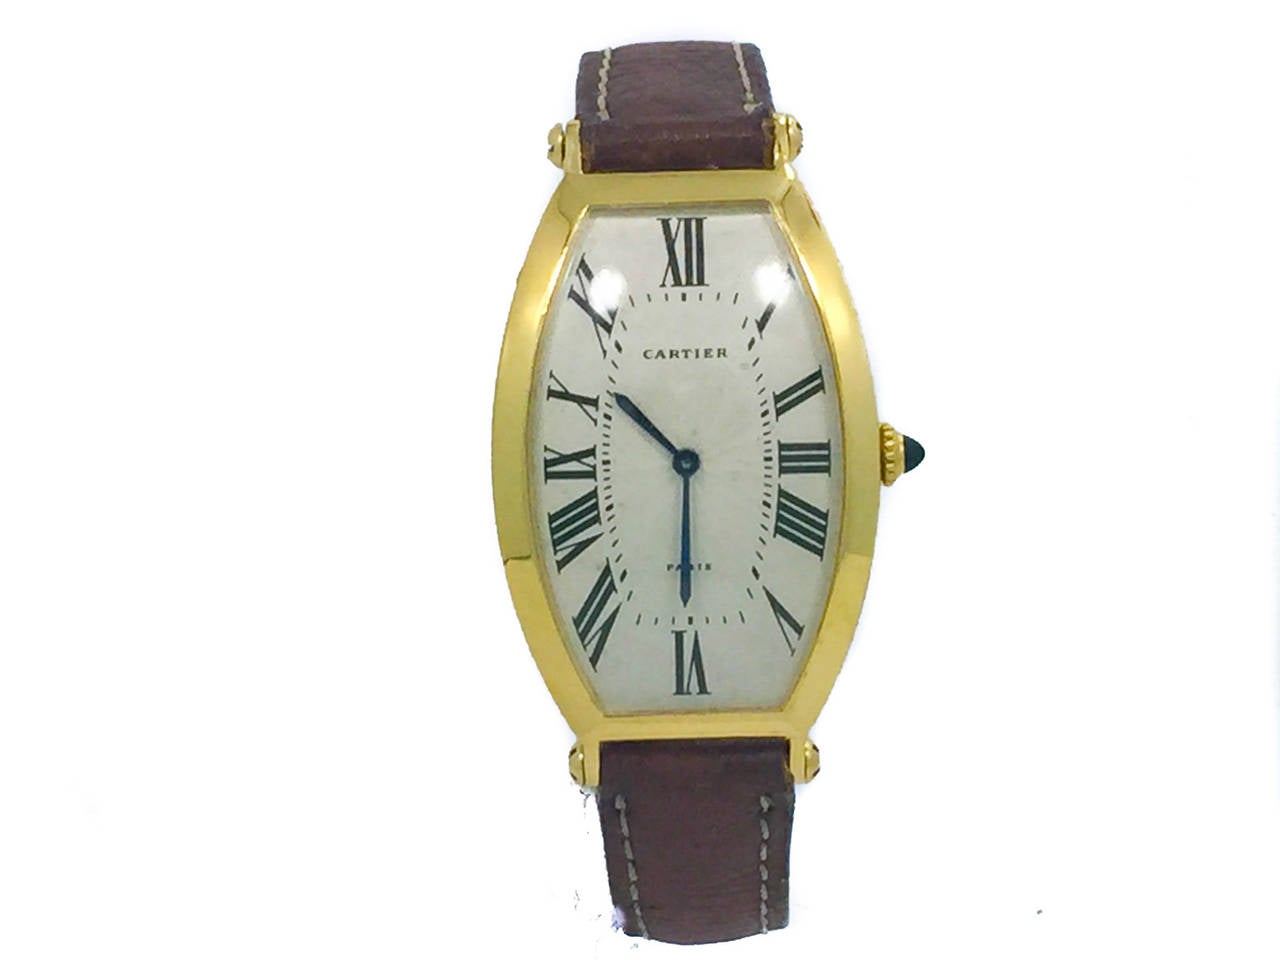 Mens (26x40mm) Cartier Tonneau in 18k Yellow Gold. The Watch is in Great Condition though there are some little spots on the dial (look at pics). The Watch is Powered by Manual Mechanical Winding. The Watch is on a Cartier Strap & Cartier Plated